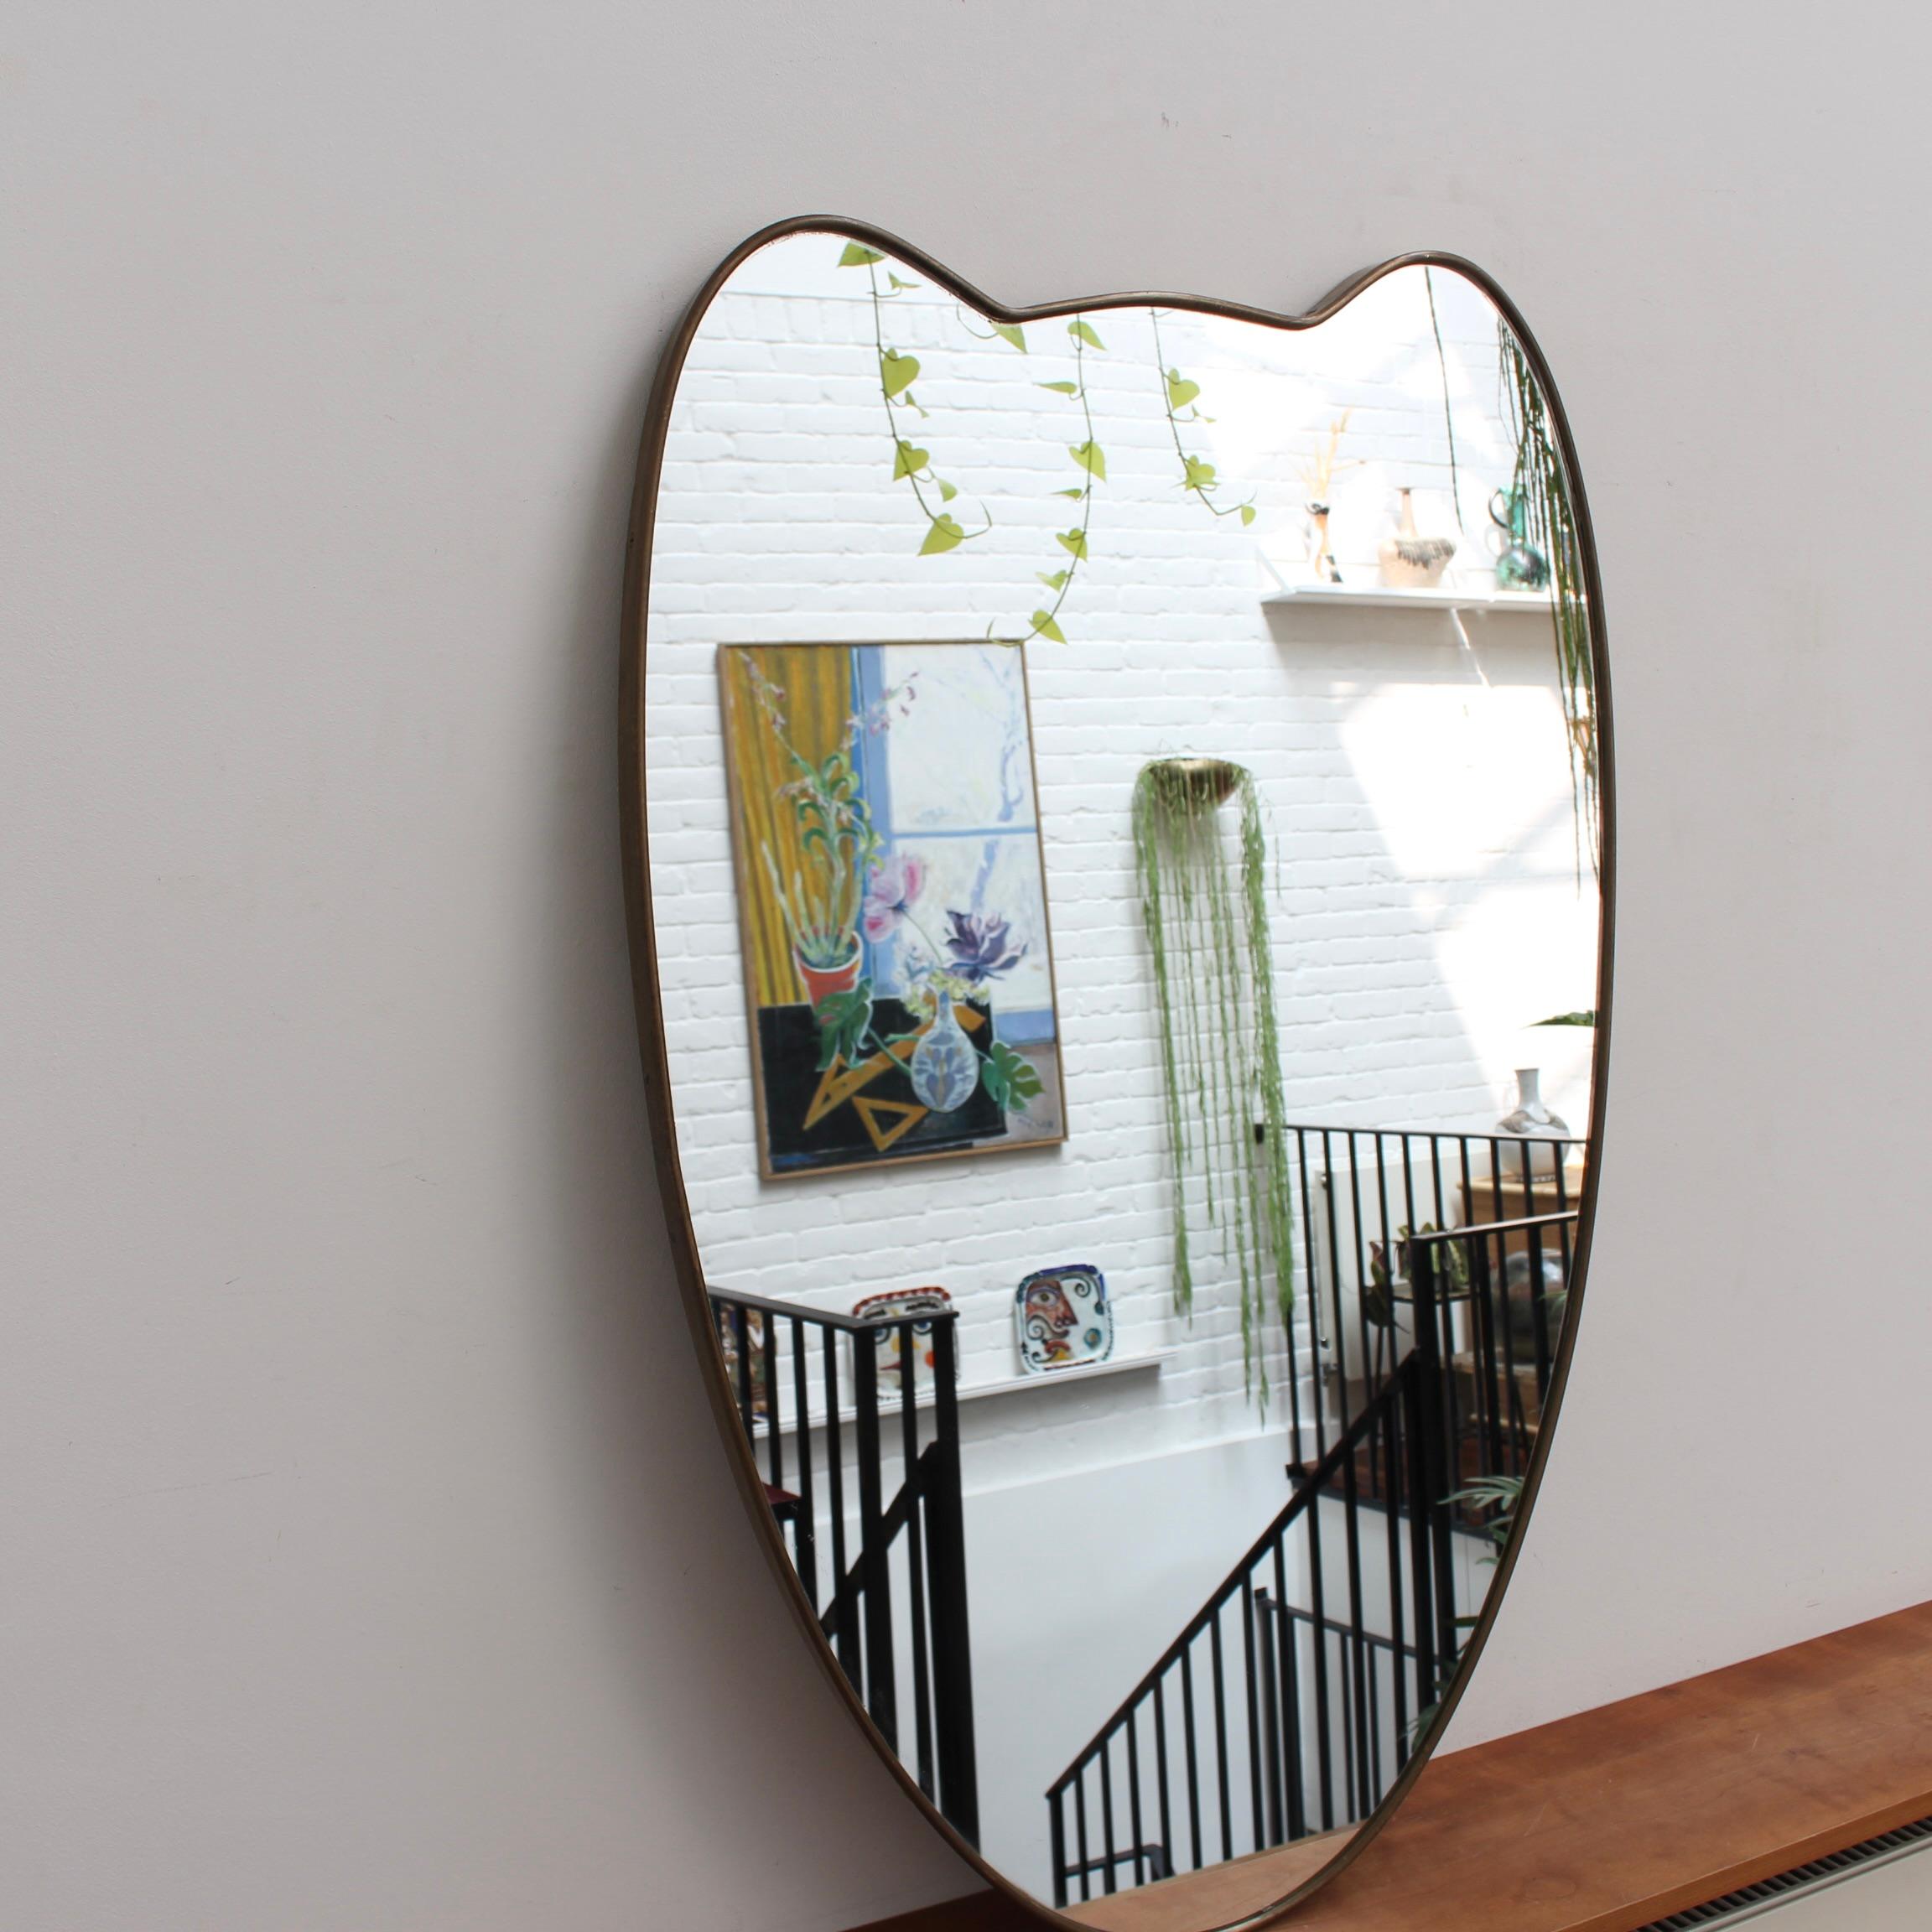 Mid-century Italian wall mirror with brass frame (circa 1950s). The mirror is classically-shaped and distinctive in a Modern style. It is in good overall condition. A beautiful patina develops on the brass frame - this one has not been polished but